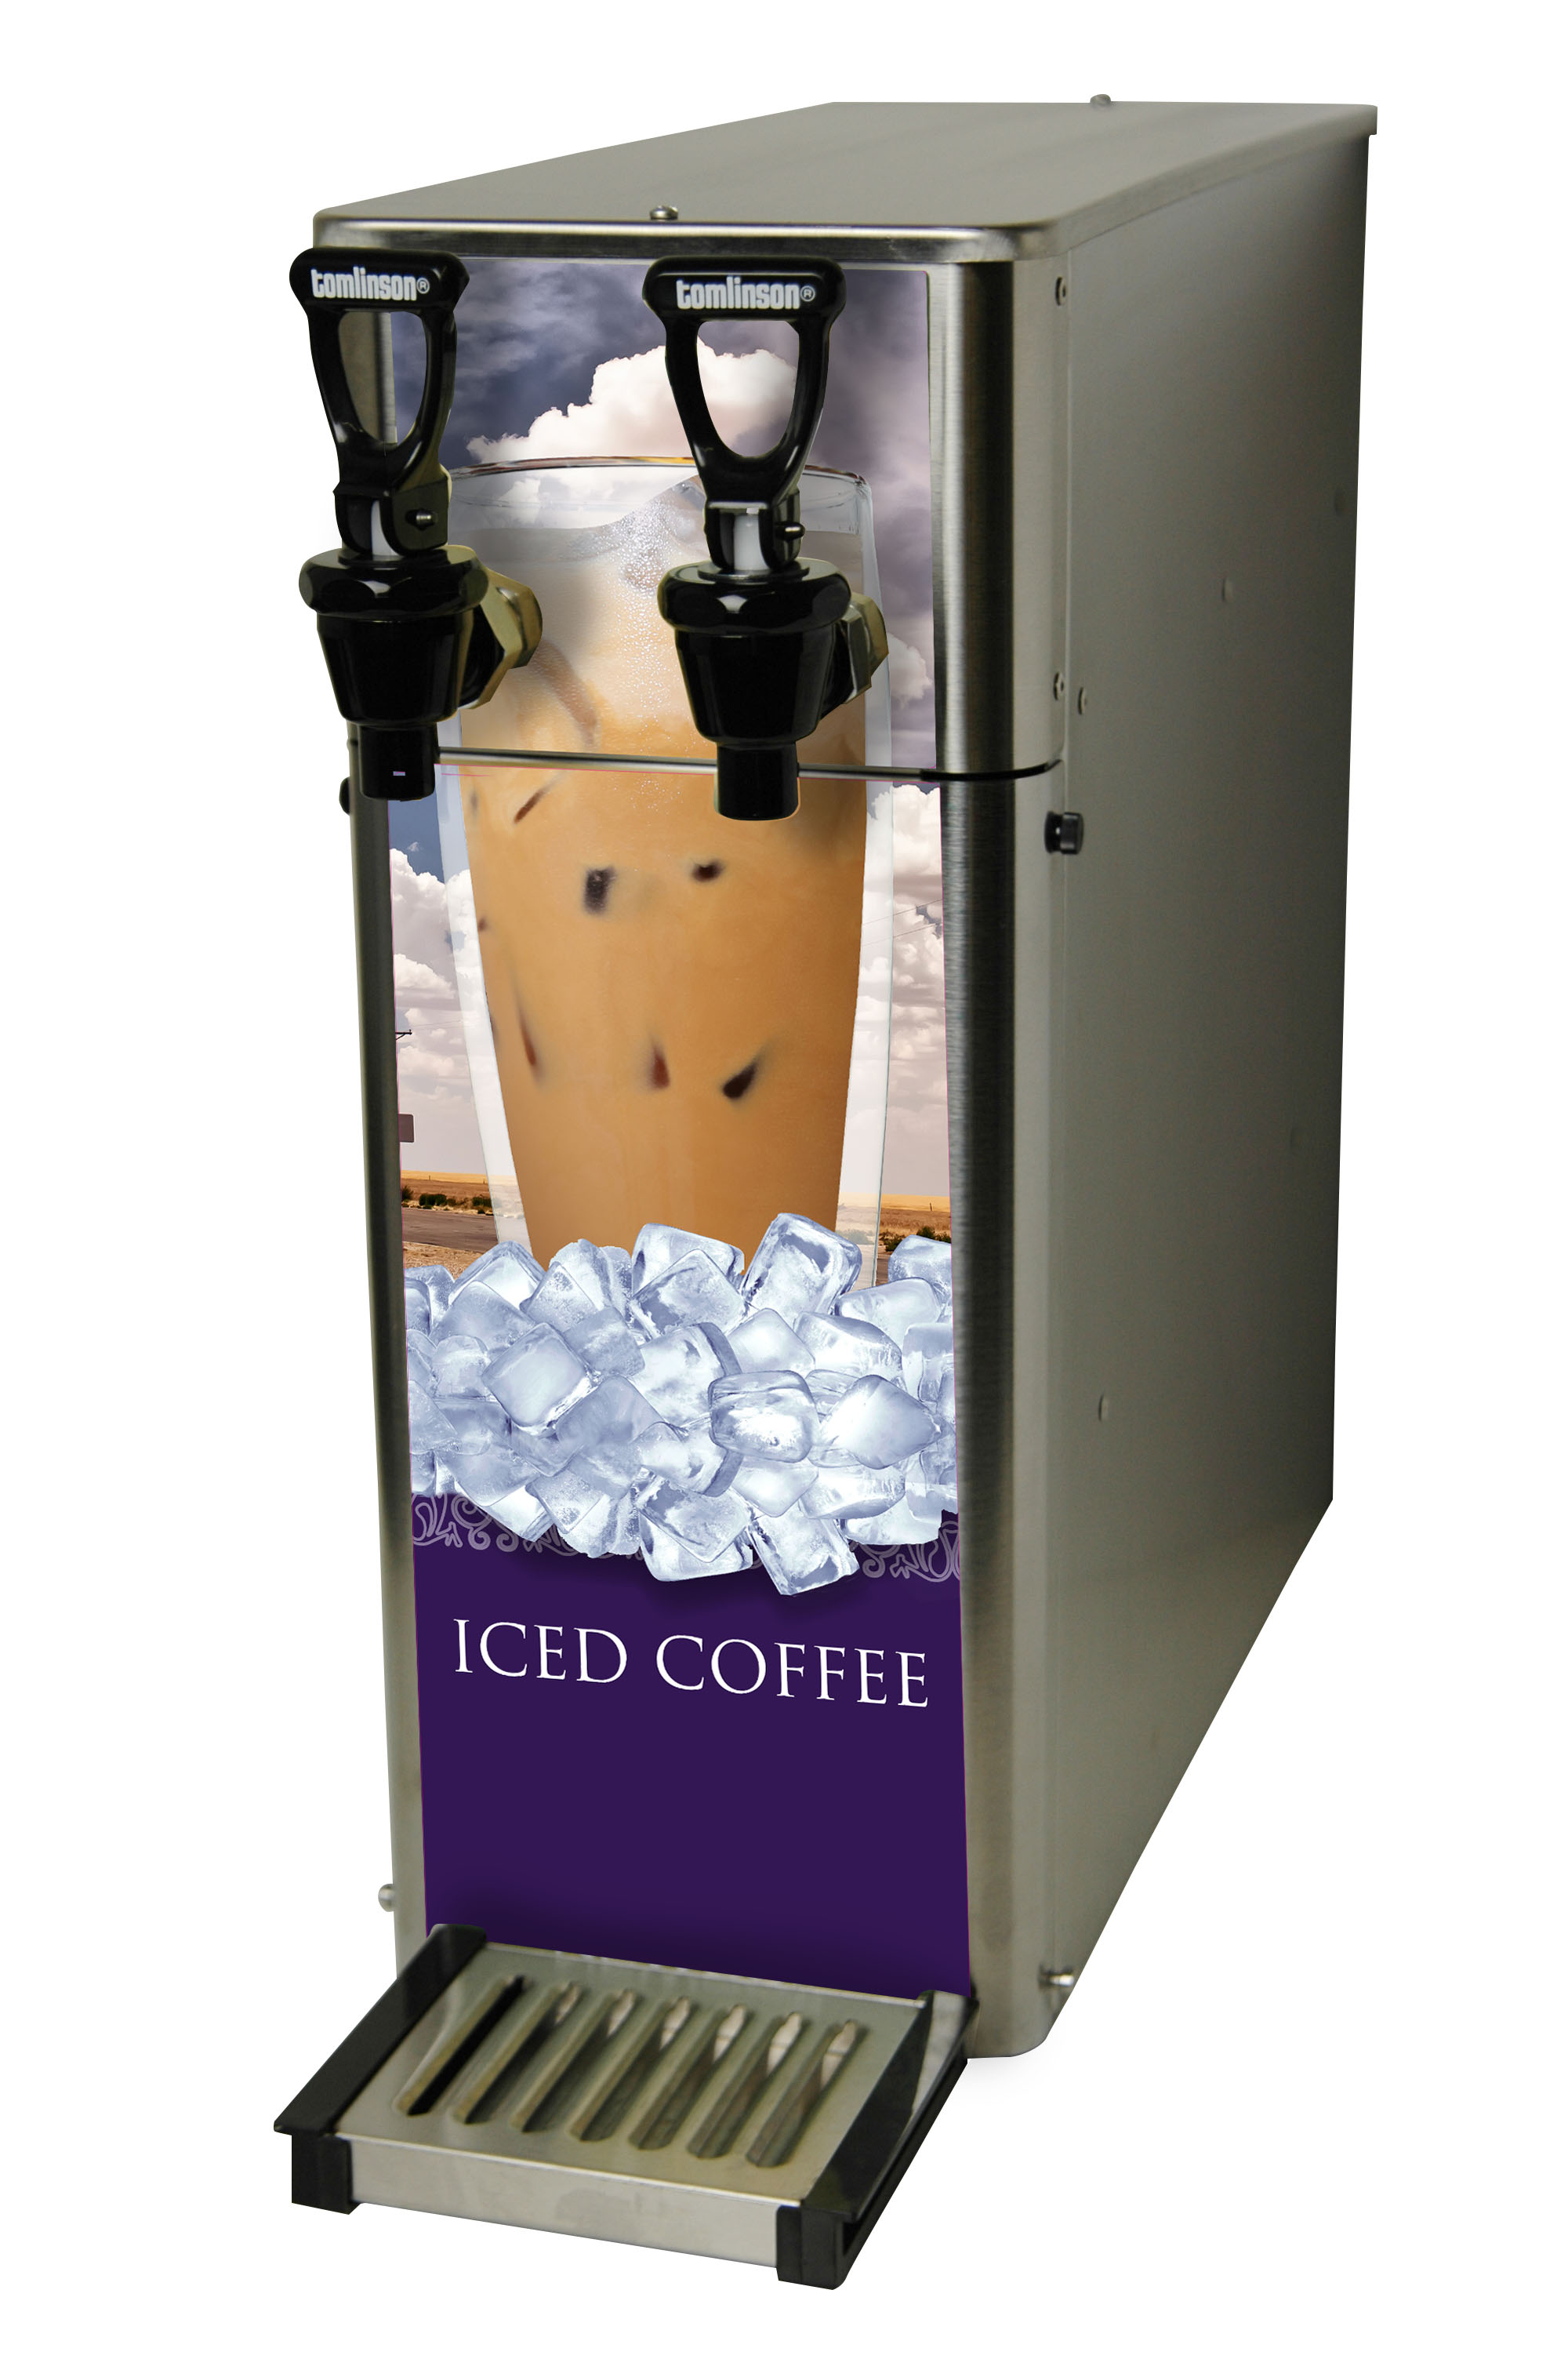 https://www.newcocoffee.com/wp-content/uploads/2018/05/FPM-2-Iced-Coffee.jpg